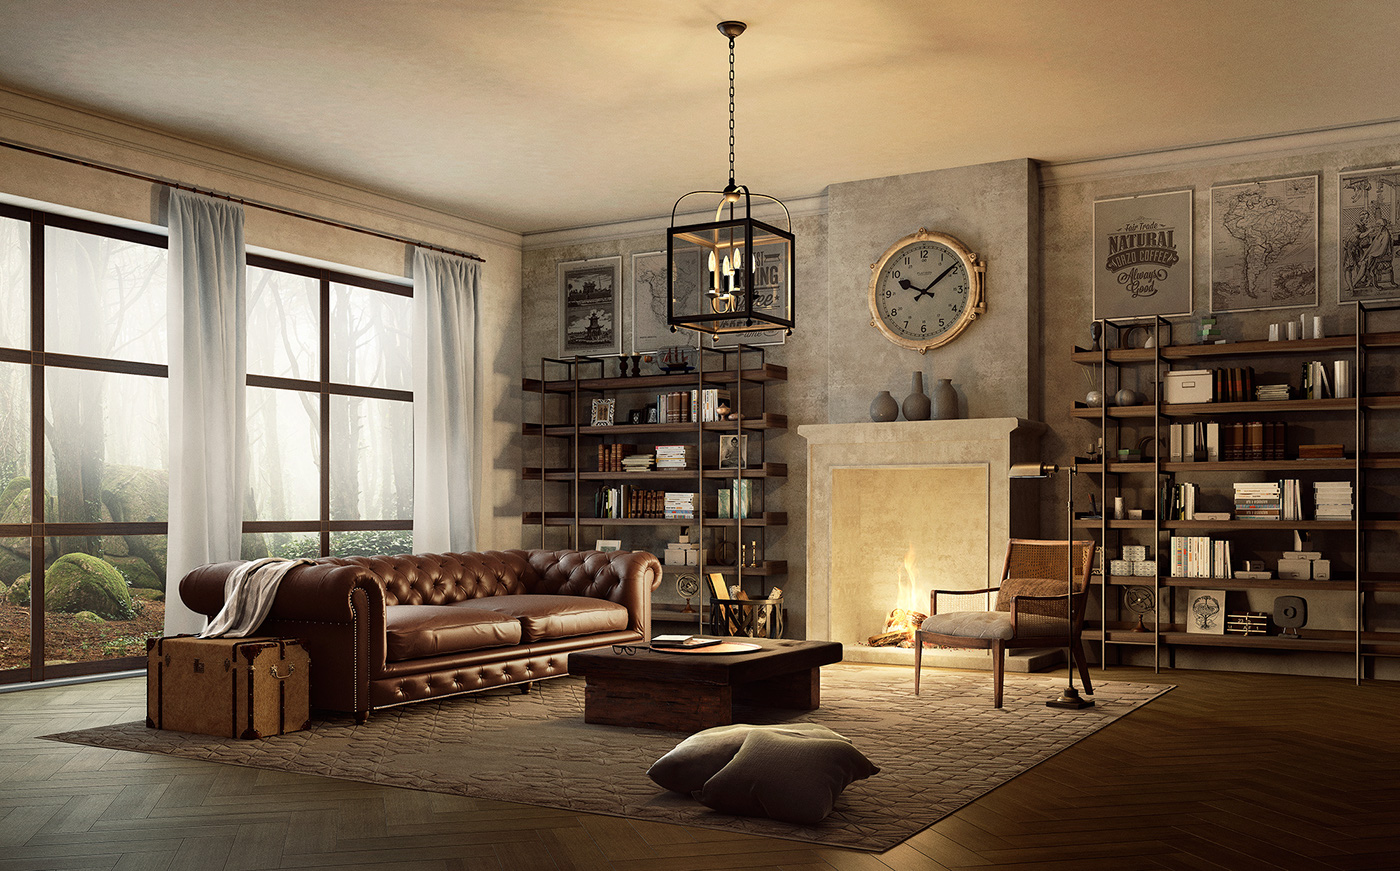 CGI furniture indoor Render archiqutecture Post Production image art creative retouching 